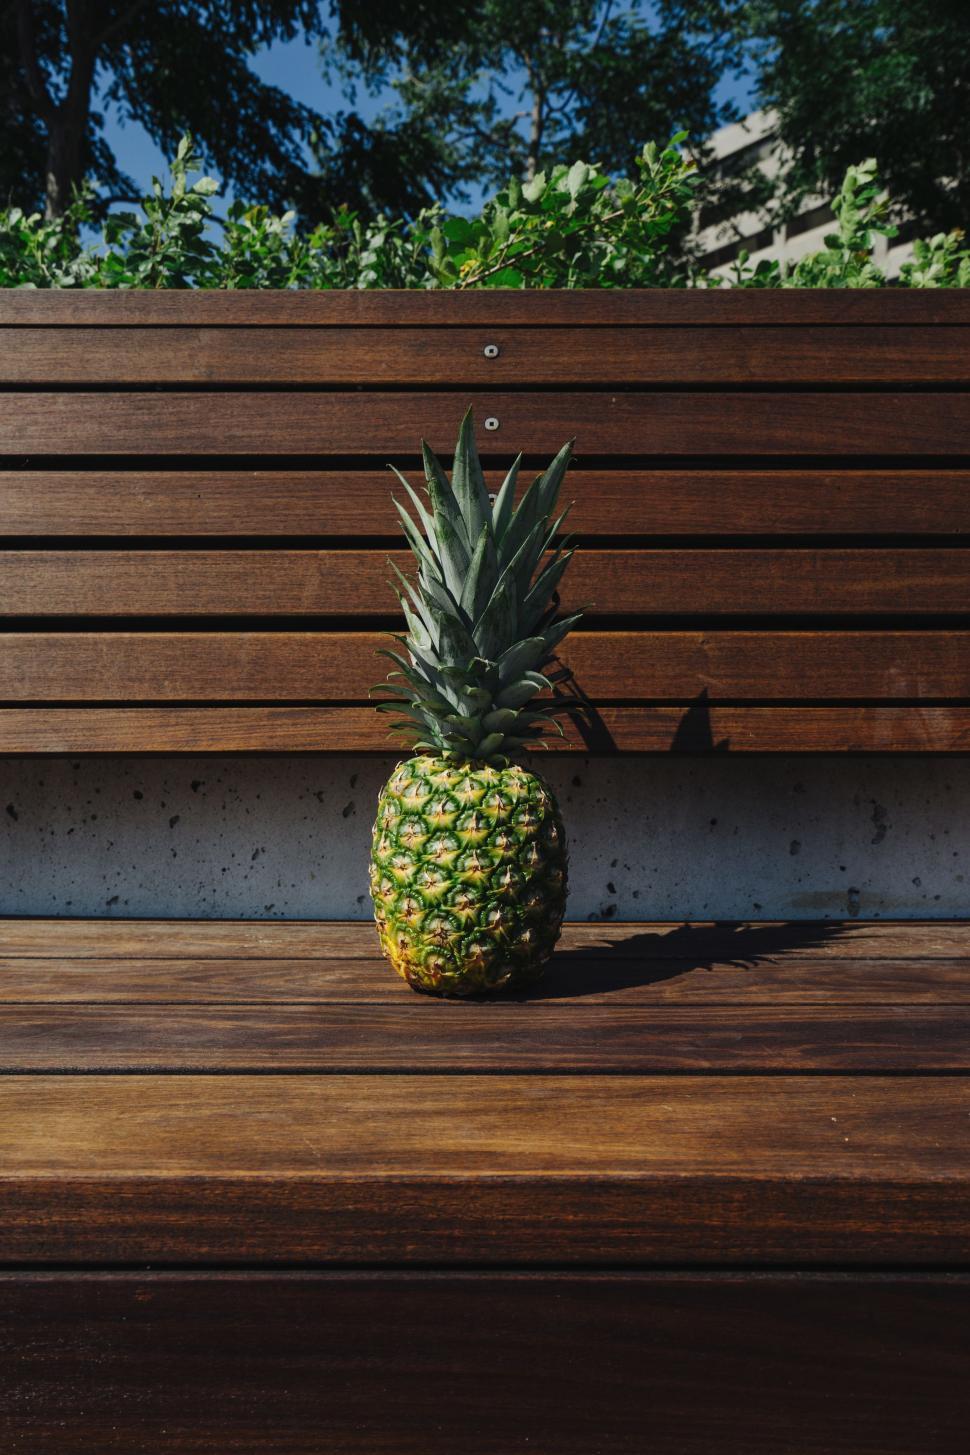 Free Image of Pineapple on bench 